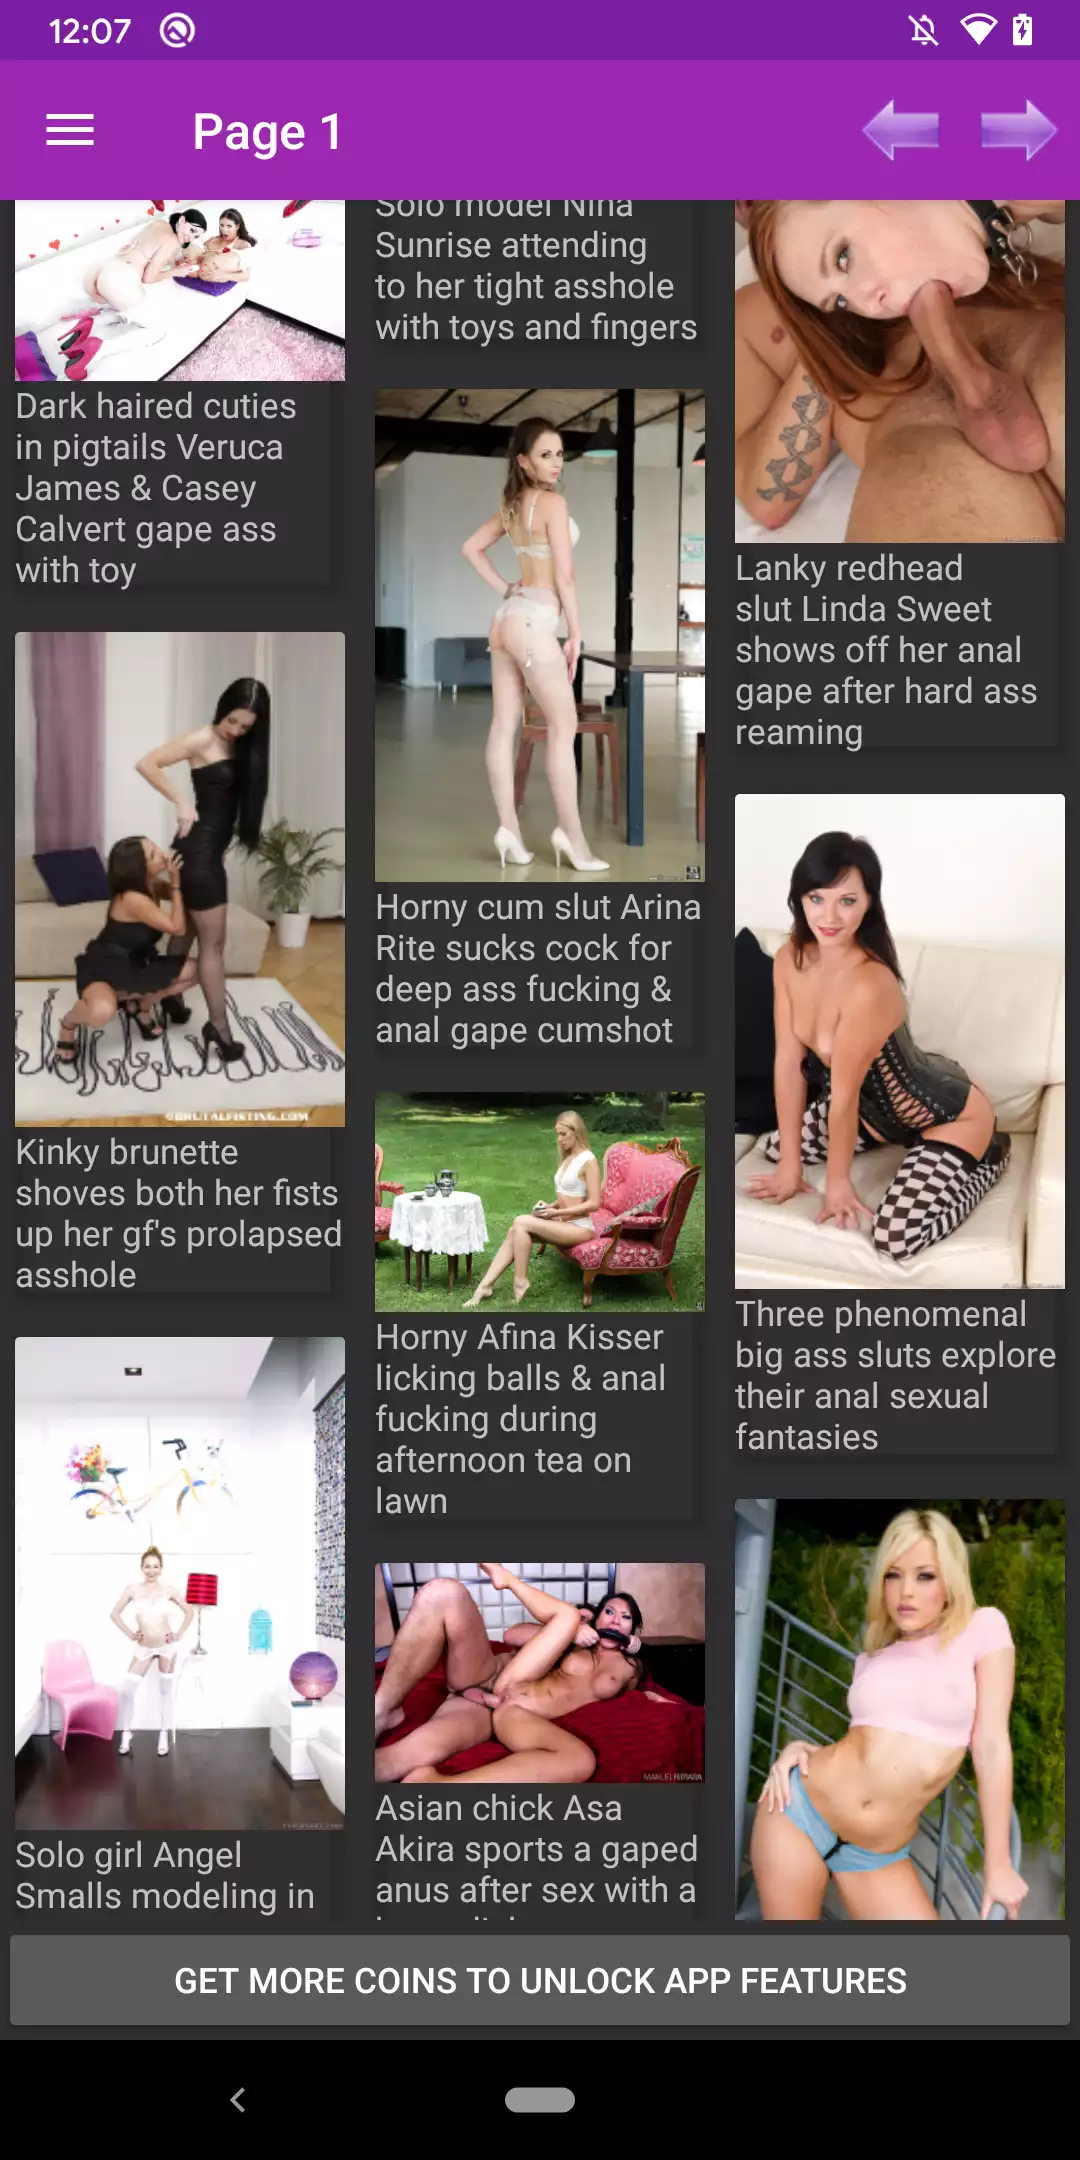 Anal Gape pics,app,pictures,apps,lisa,wallpapers,for,porn,henati,good,sexy,gape,game,hentia,galleries,excuses,apk,upskirt,pic,puzzles,watching,and,anal,image,pornstars,panties,hentai